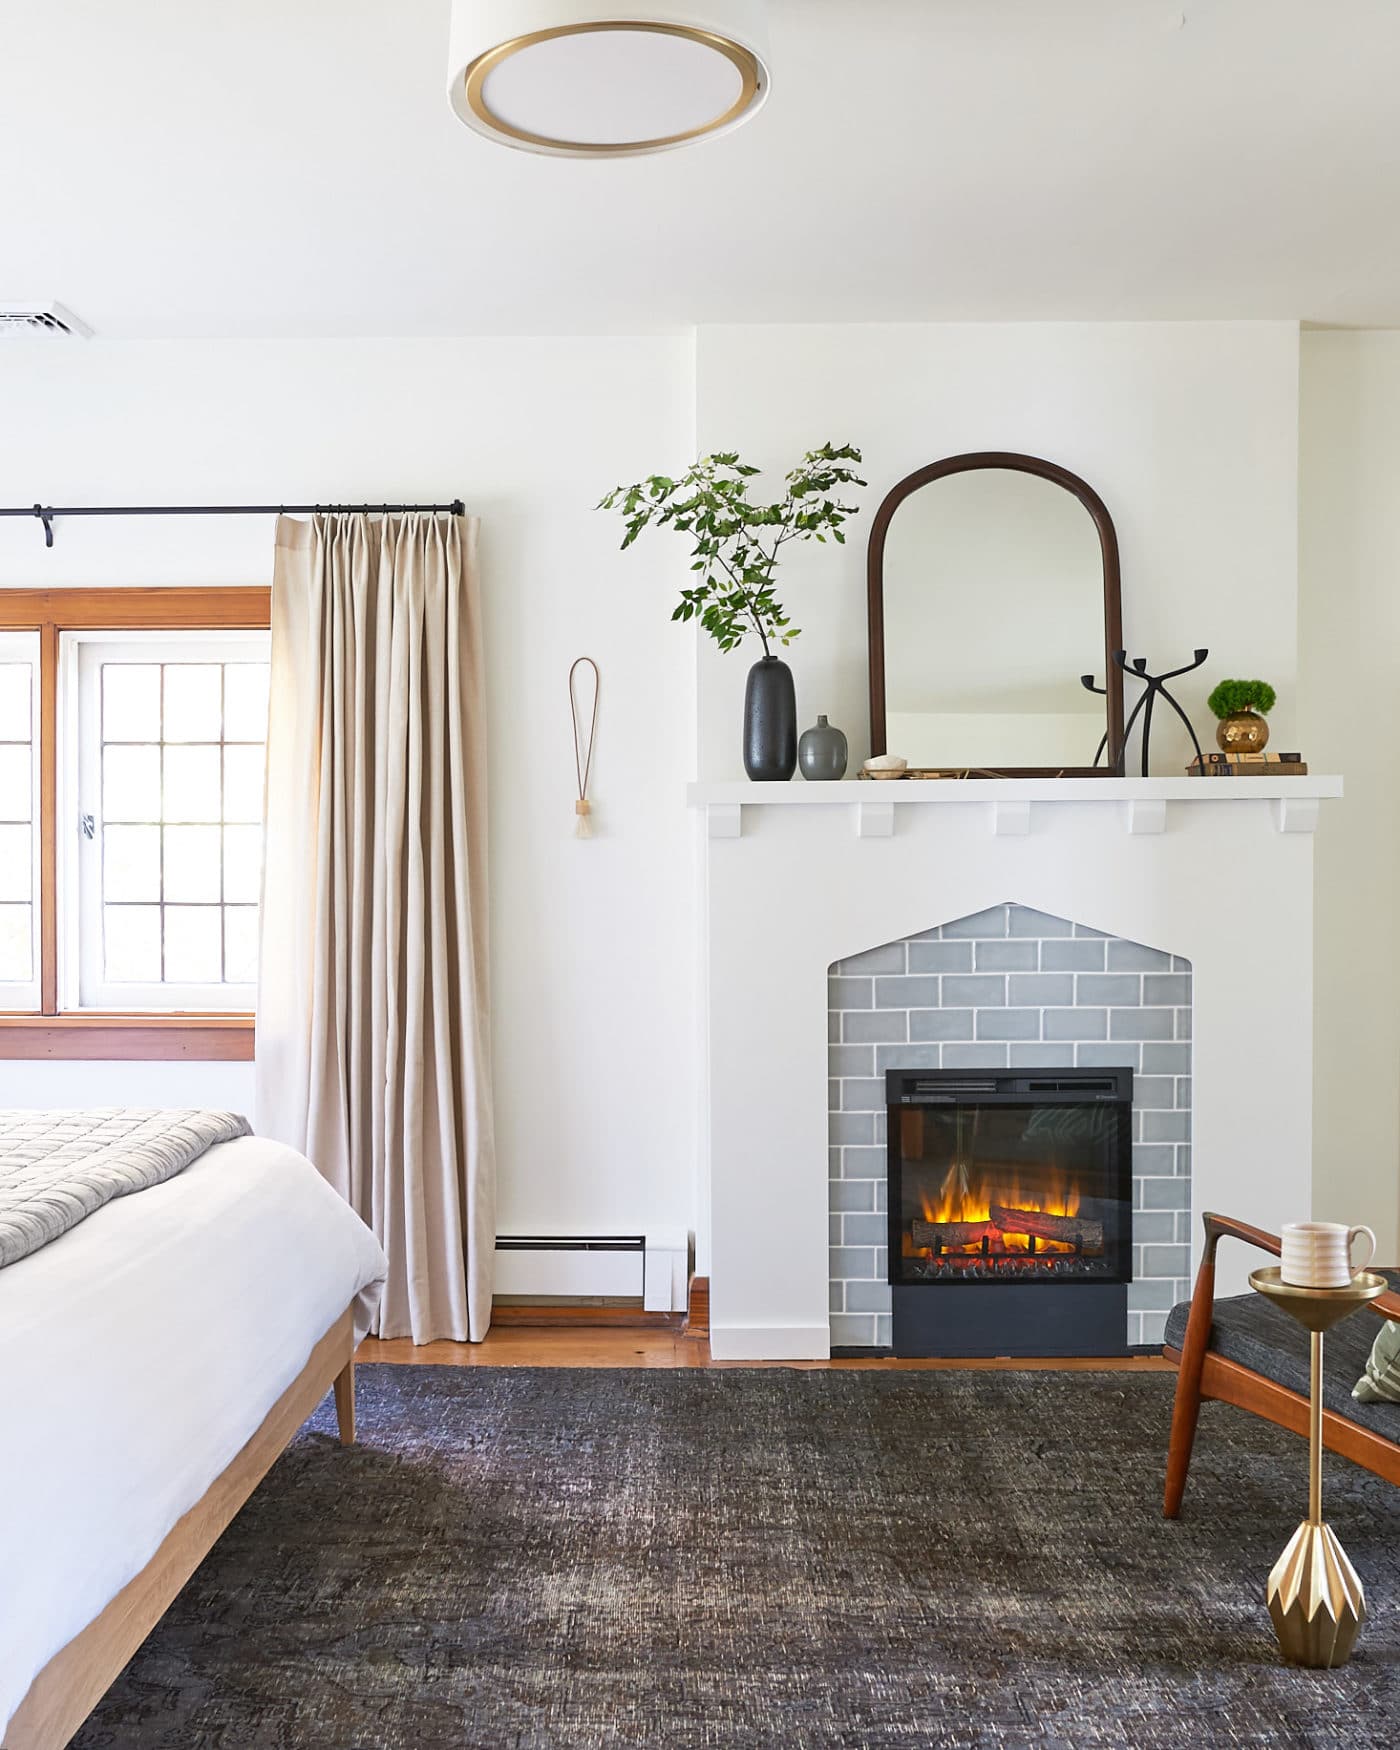 The Sweet Beast One Room Challenge // beautiful neutrals, wood tones, vintage rug and fireplace